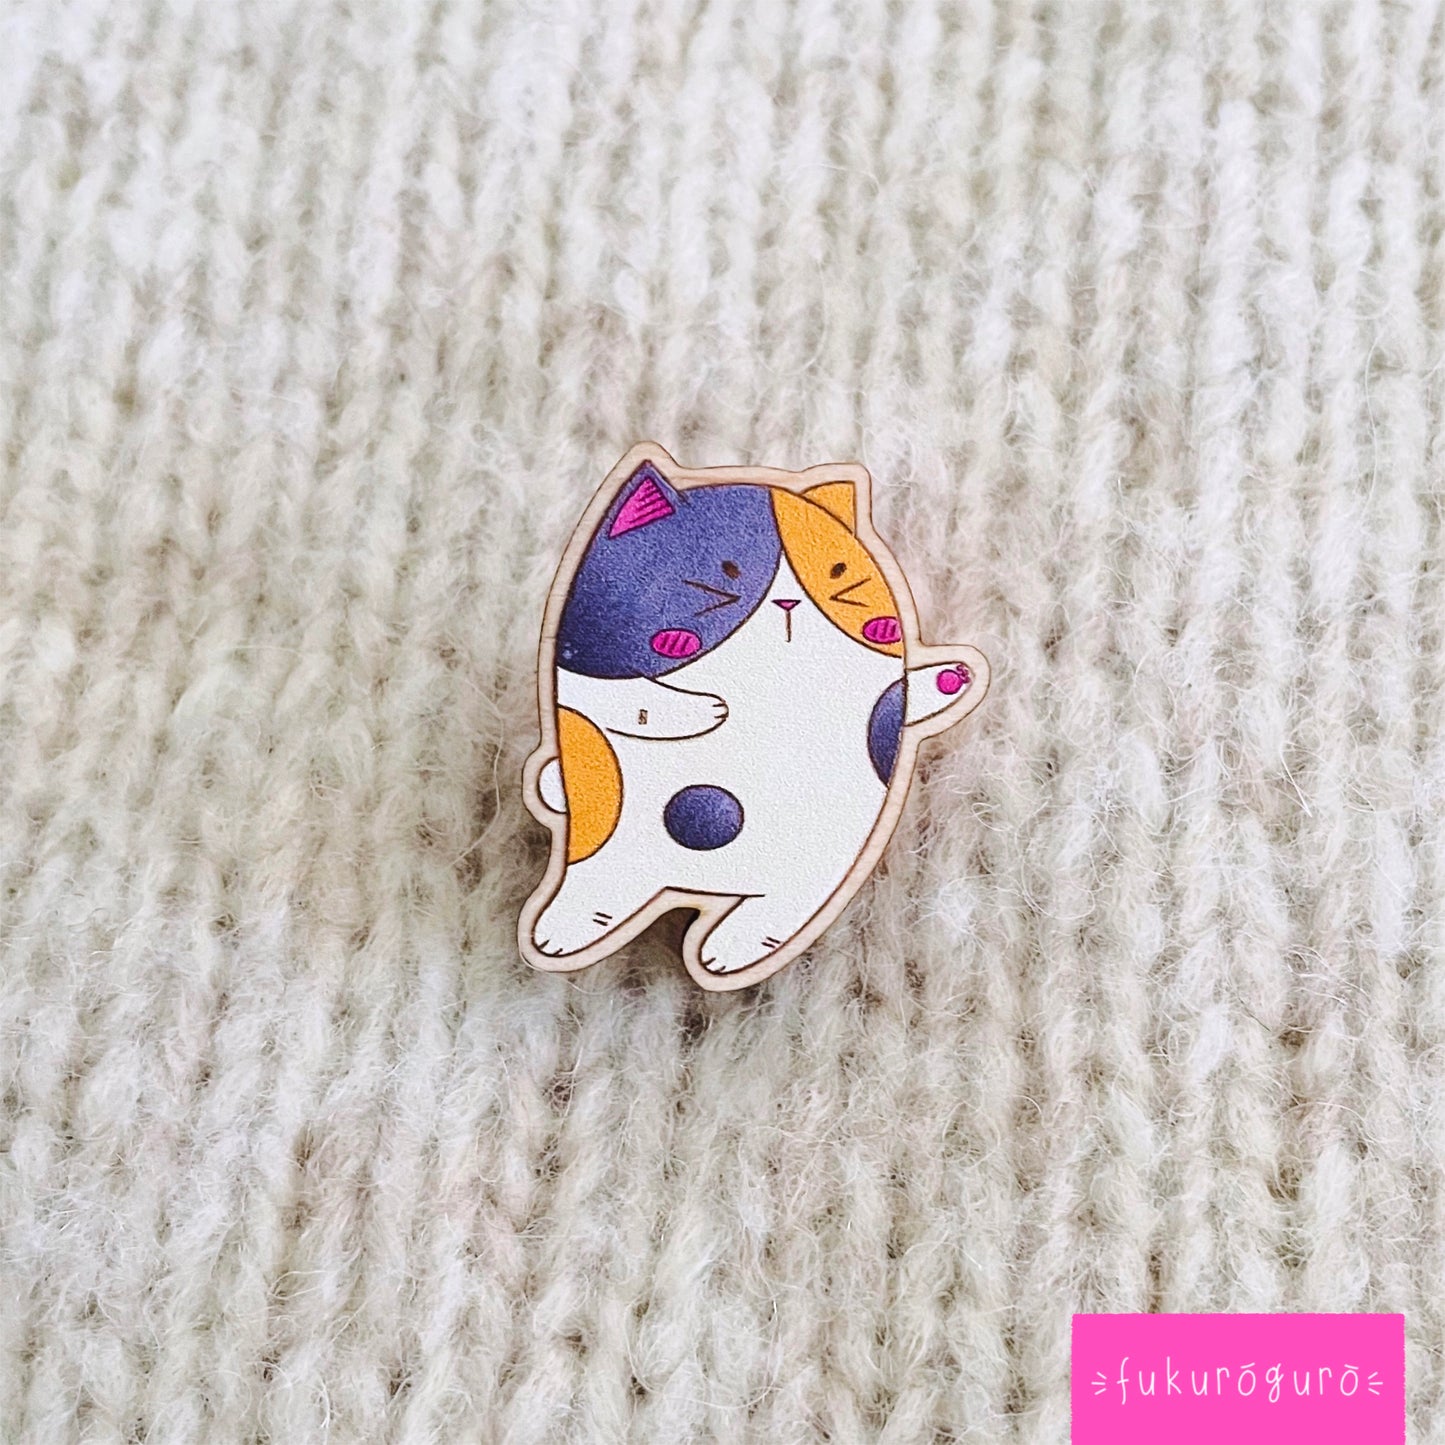 wooden calico cat pin